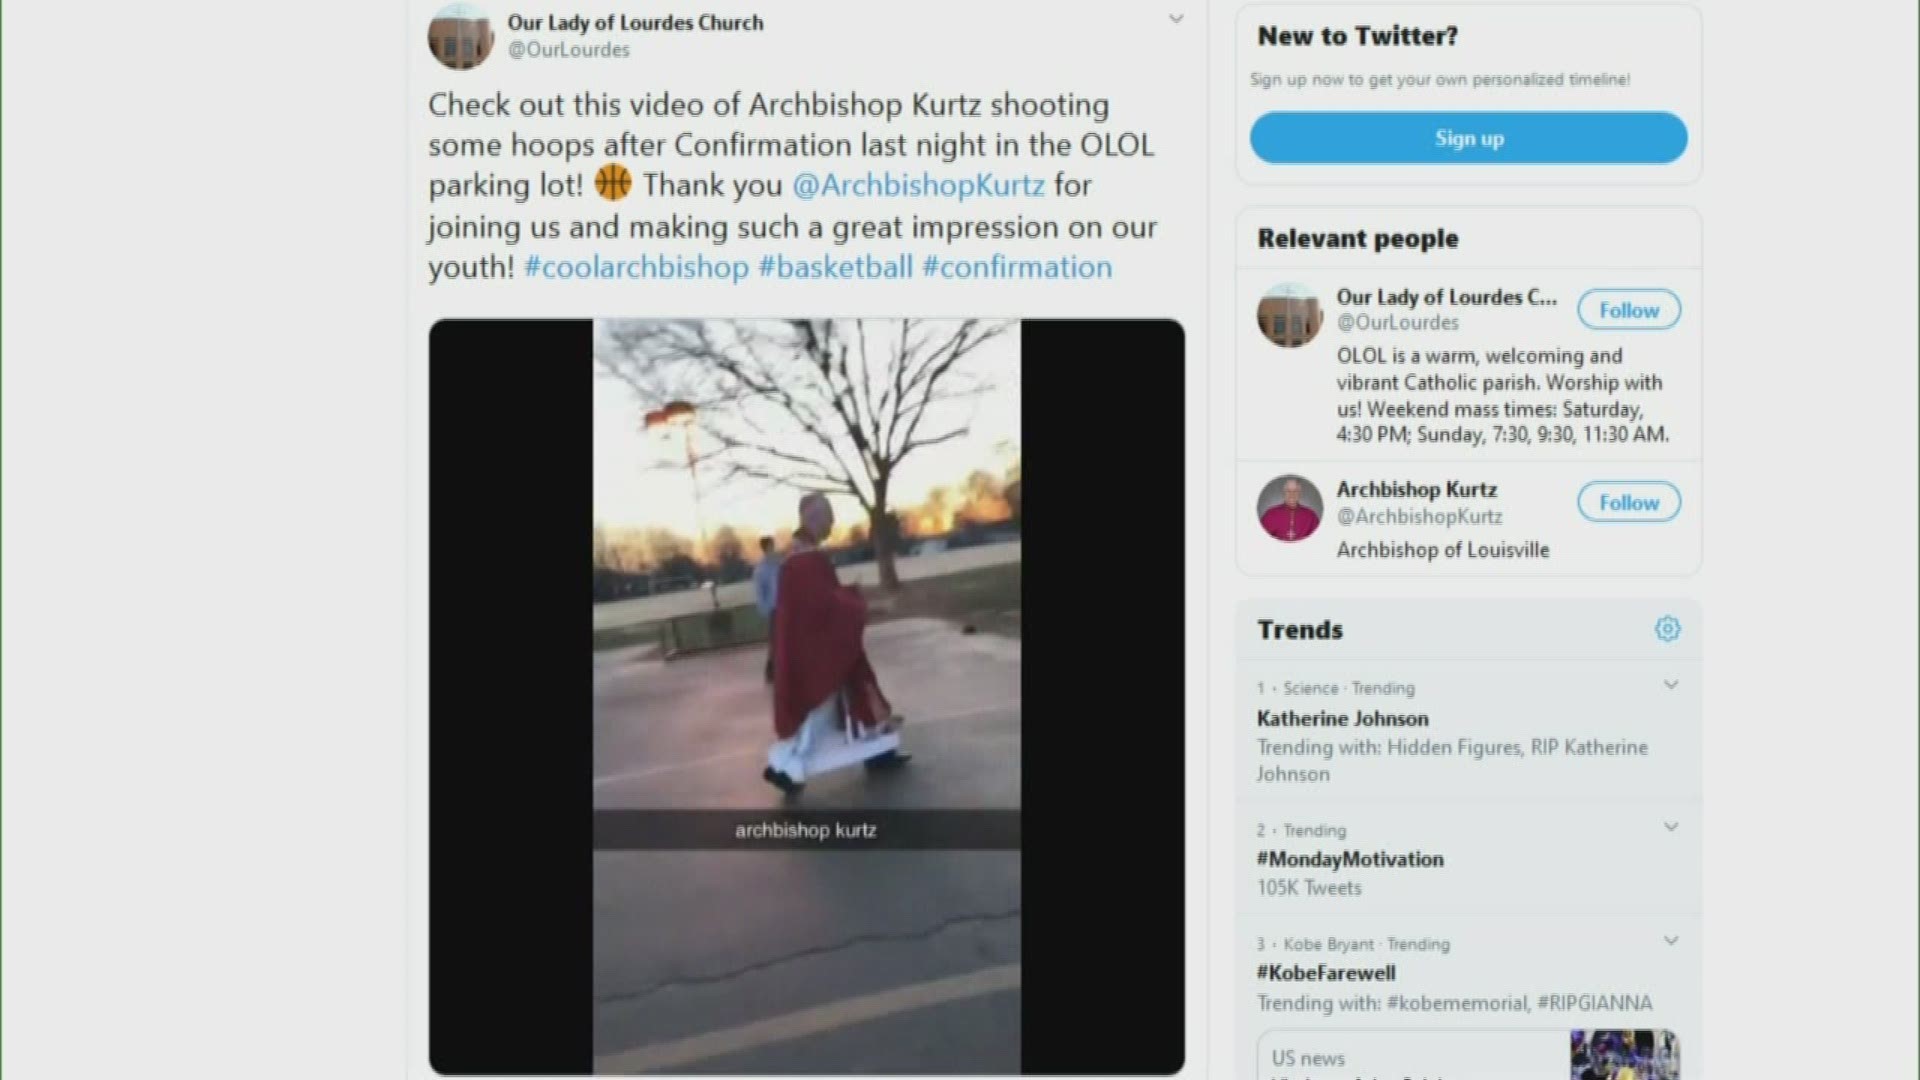 Archbishop Kurtz didn't let his formal attire get in the way of taking some shots with kids in the parking lot of Our Lady of Lourdes Church.